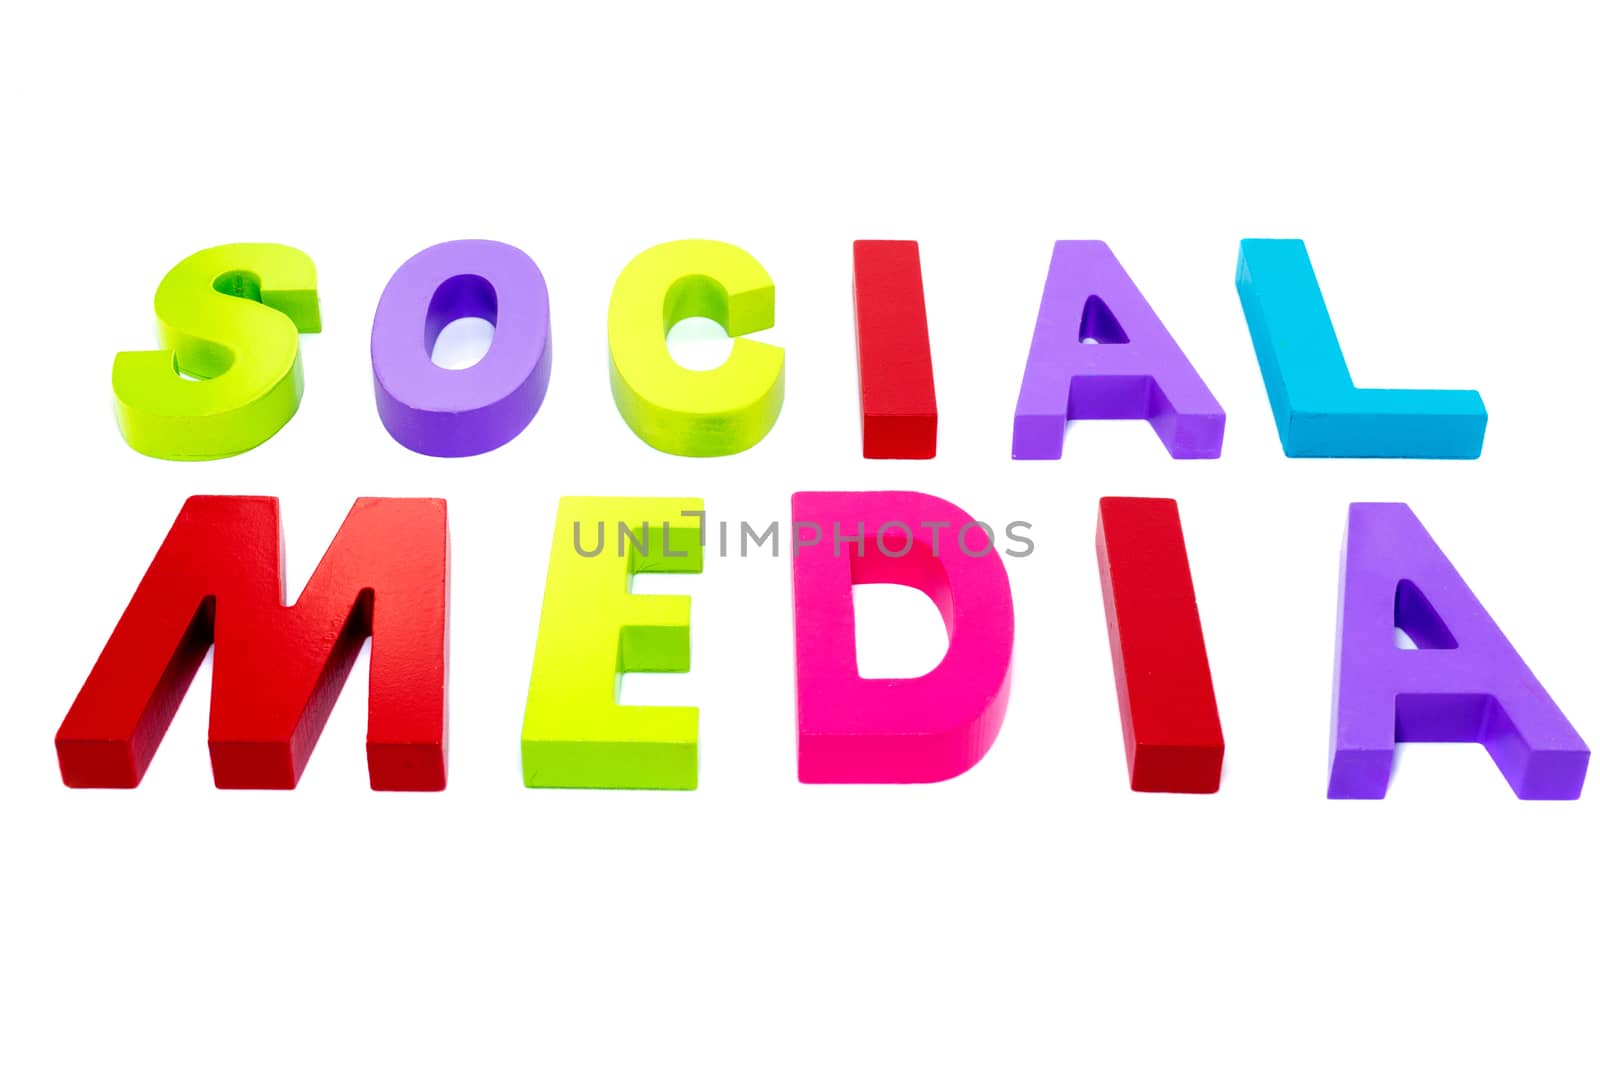 social media in red green pink text on isolated white background